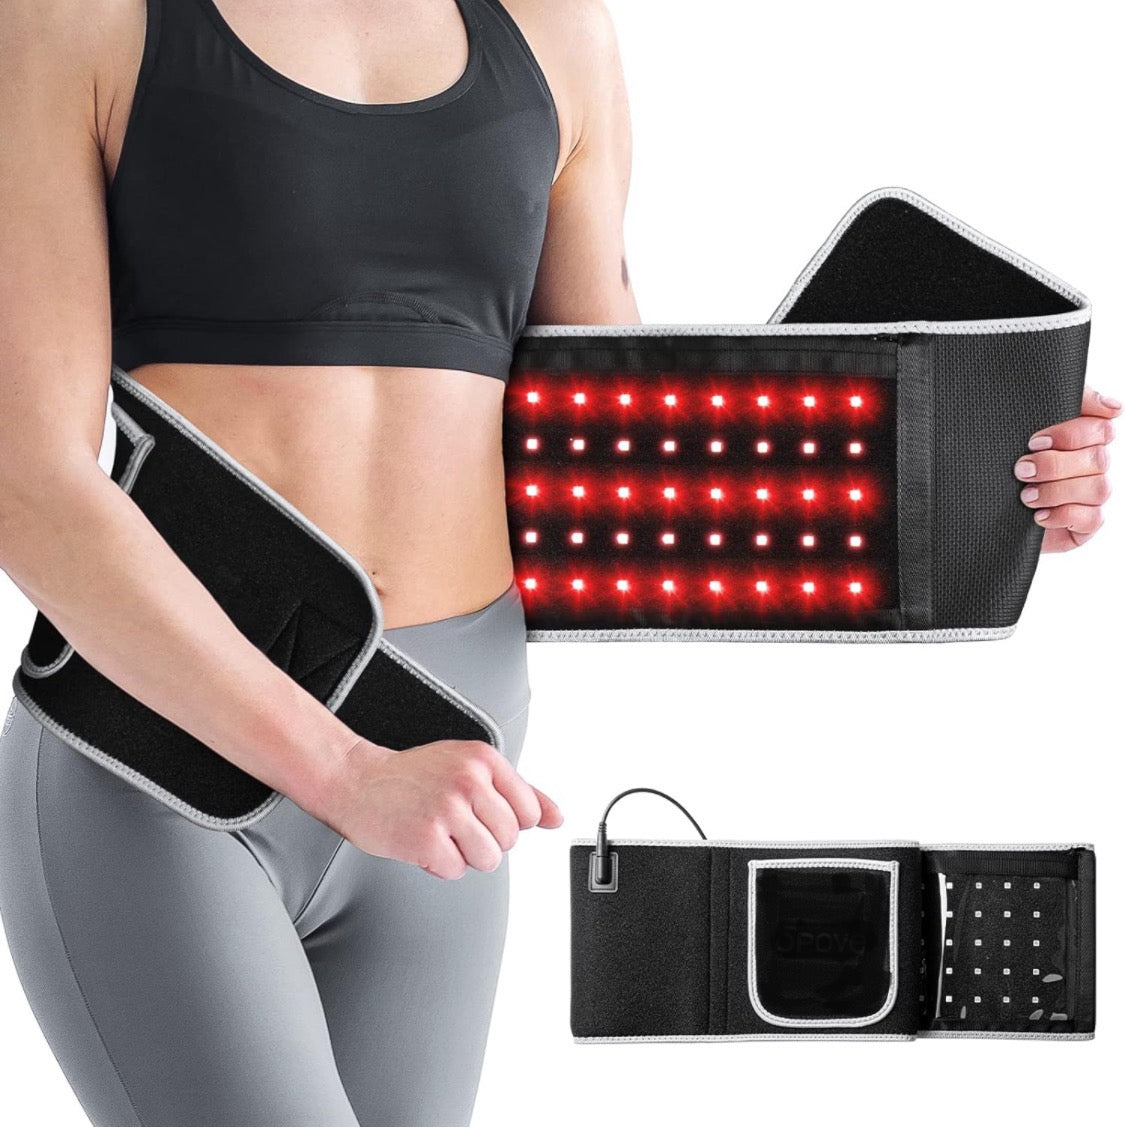 The Future of Pain Management: Red Light Therapy Belts in the Spotlight